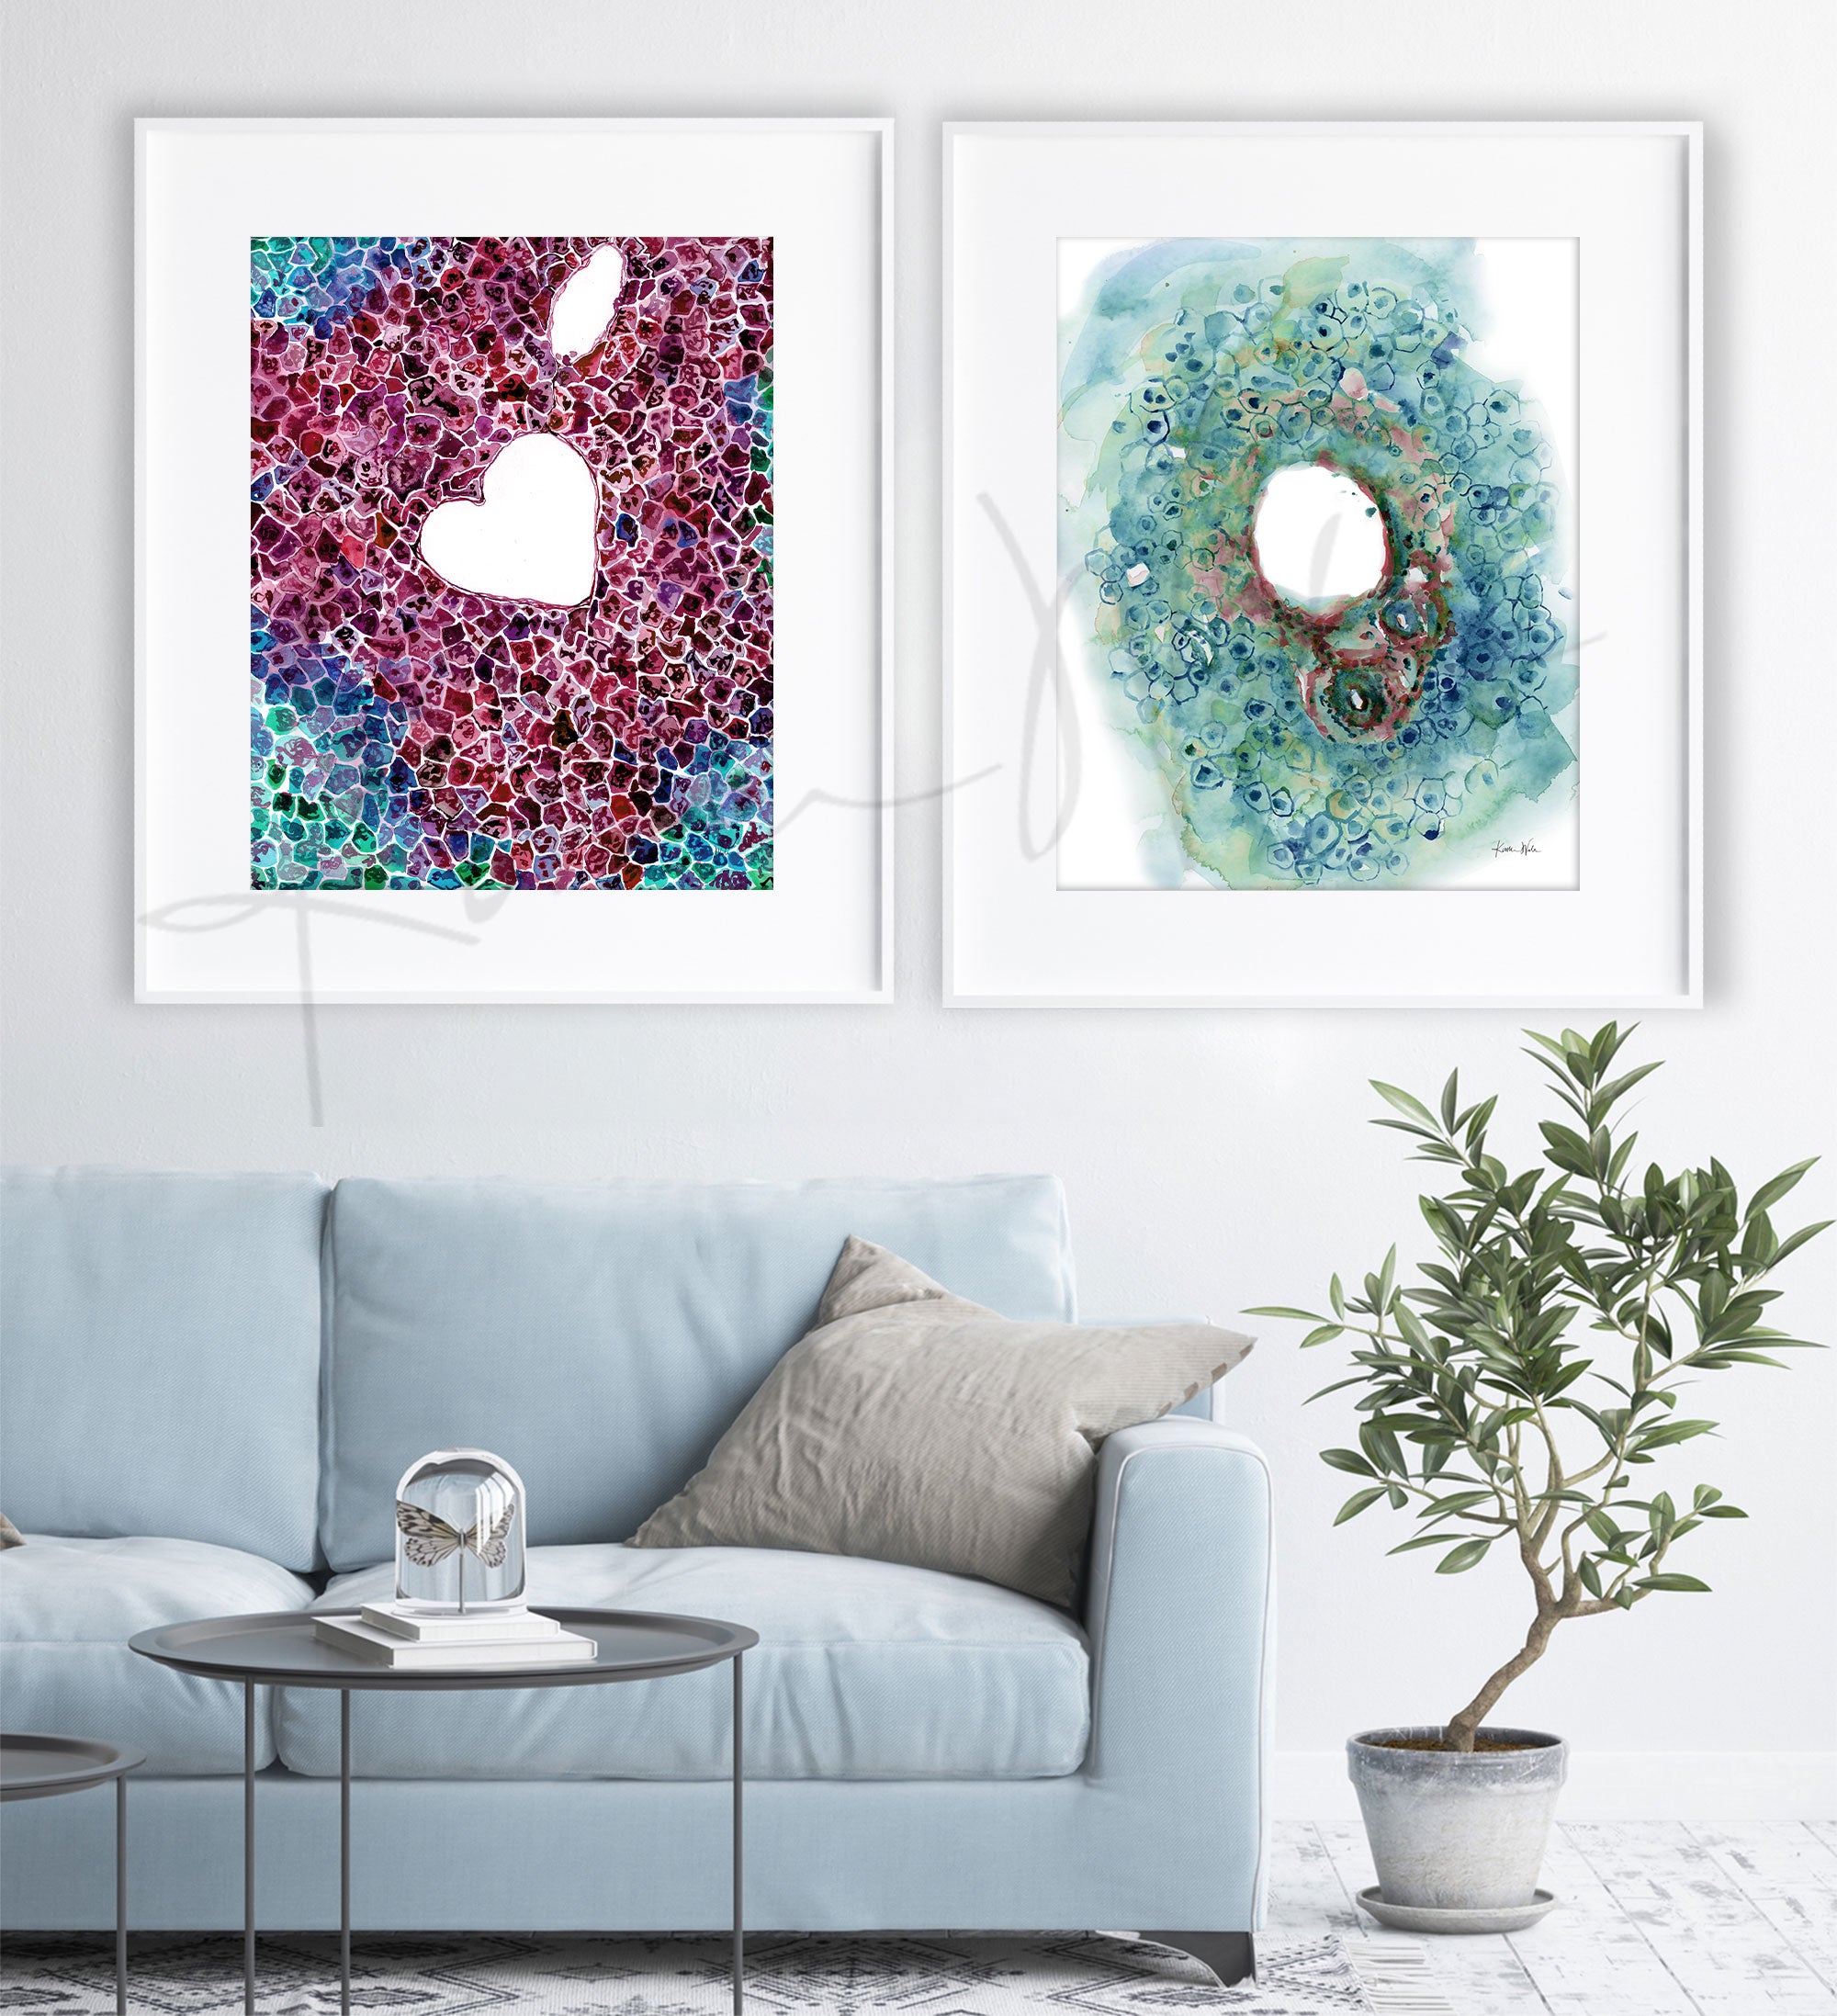 Framed watercolor painting set of the bile and hepatic ducts. The paintings are hanging over a blue couch.